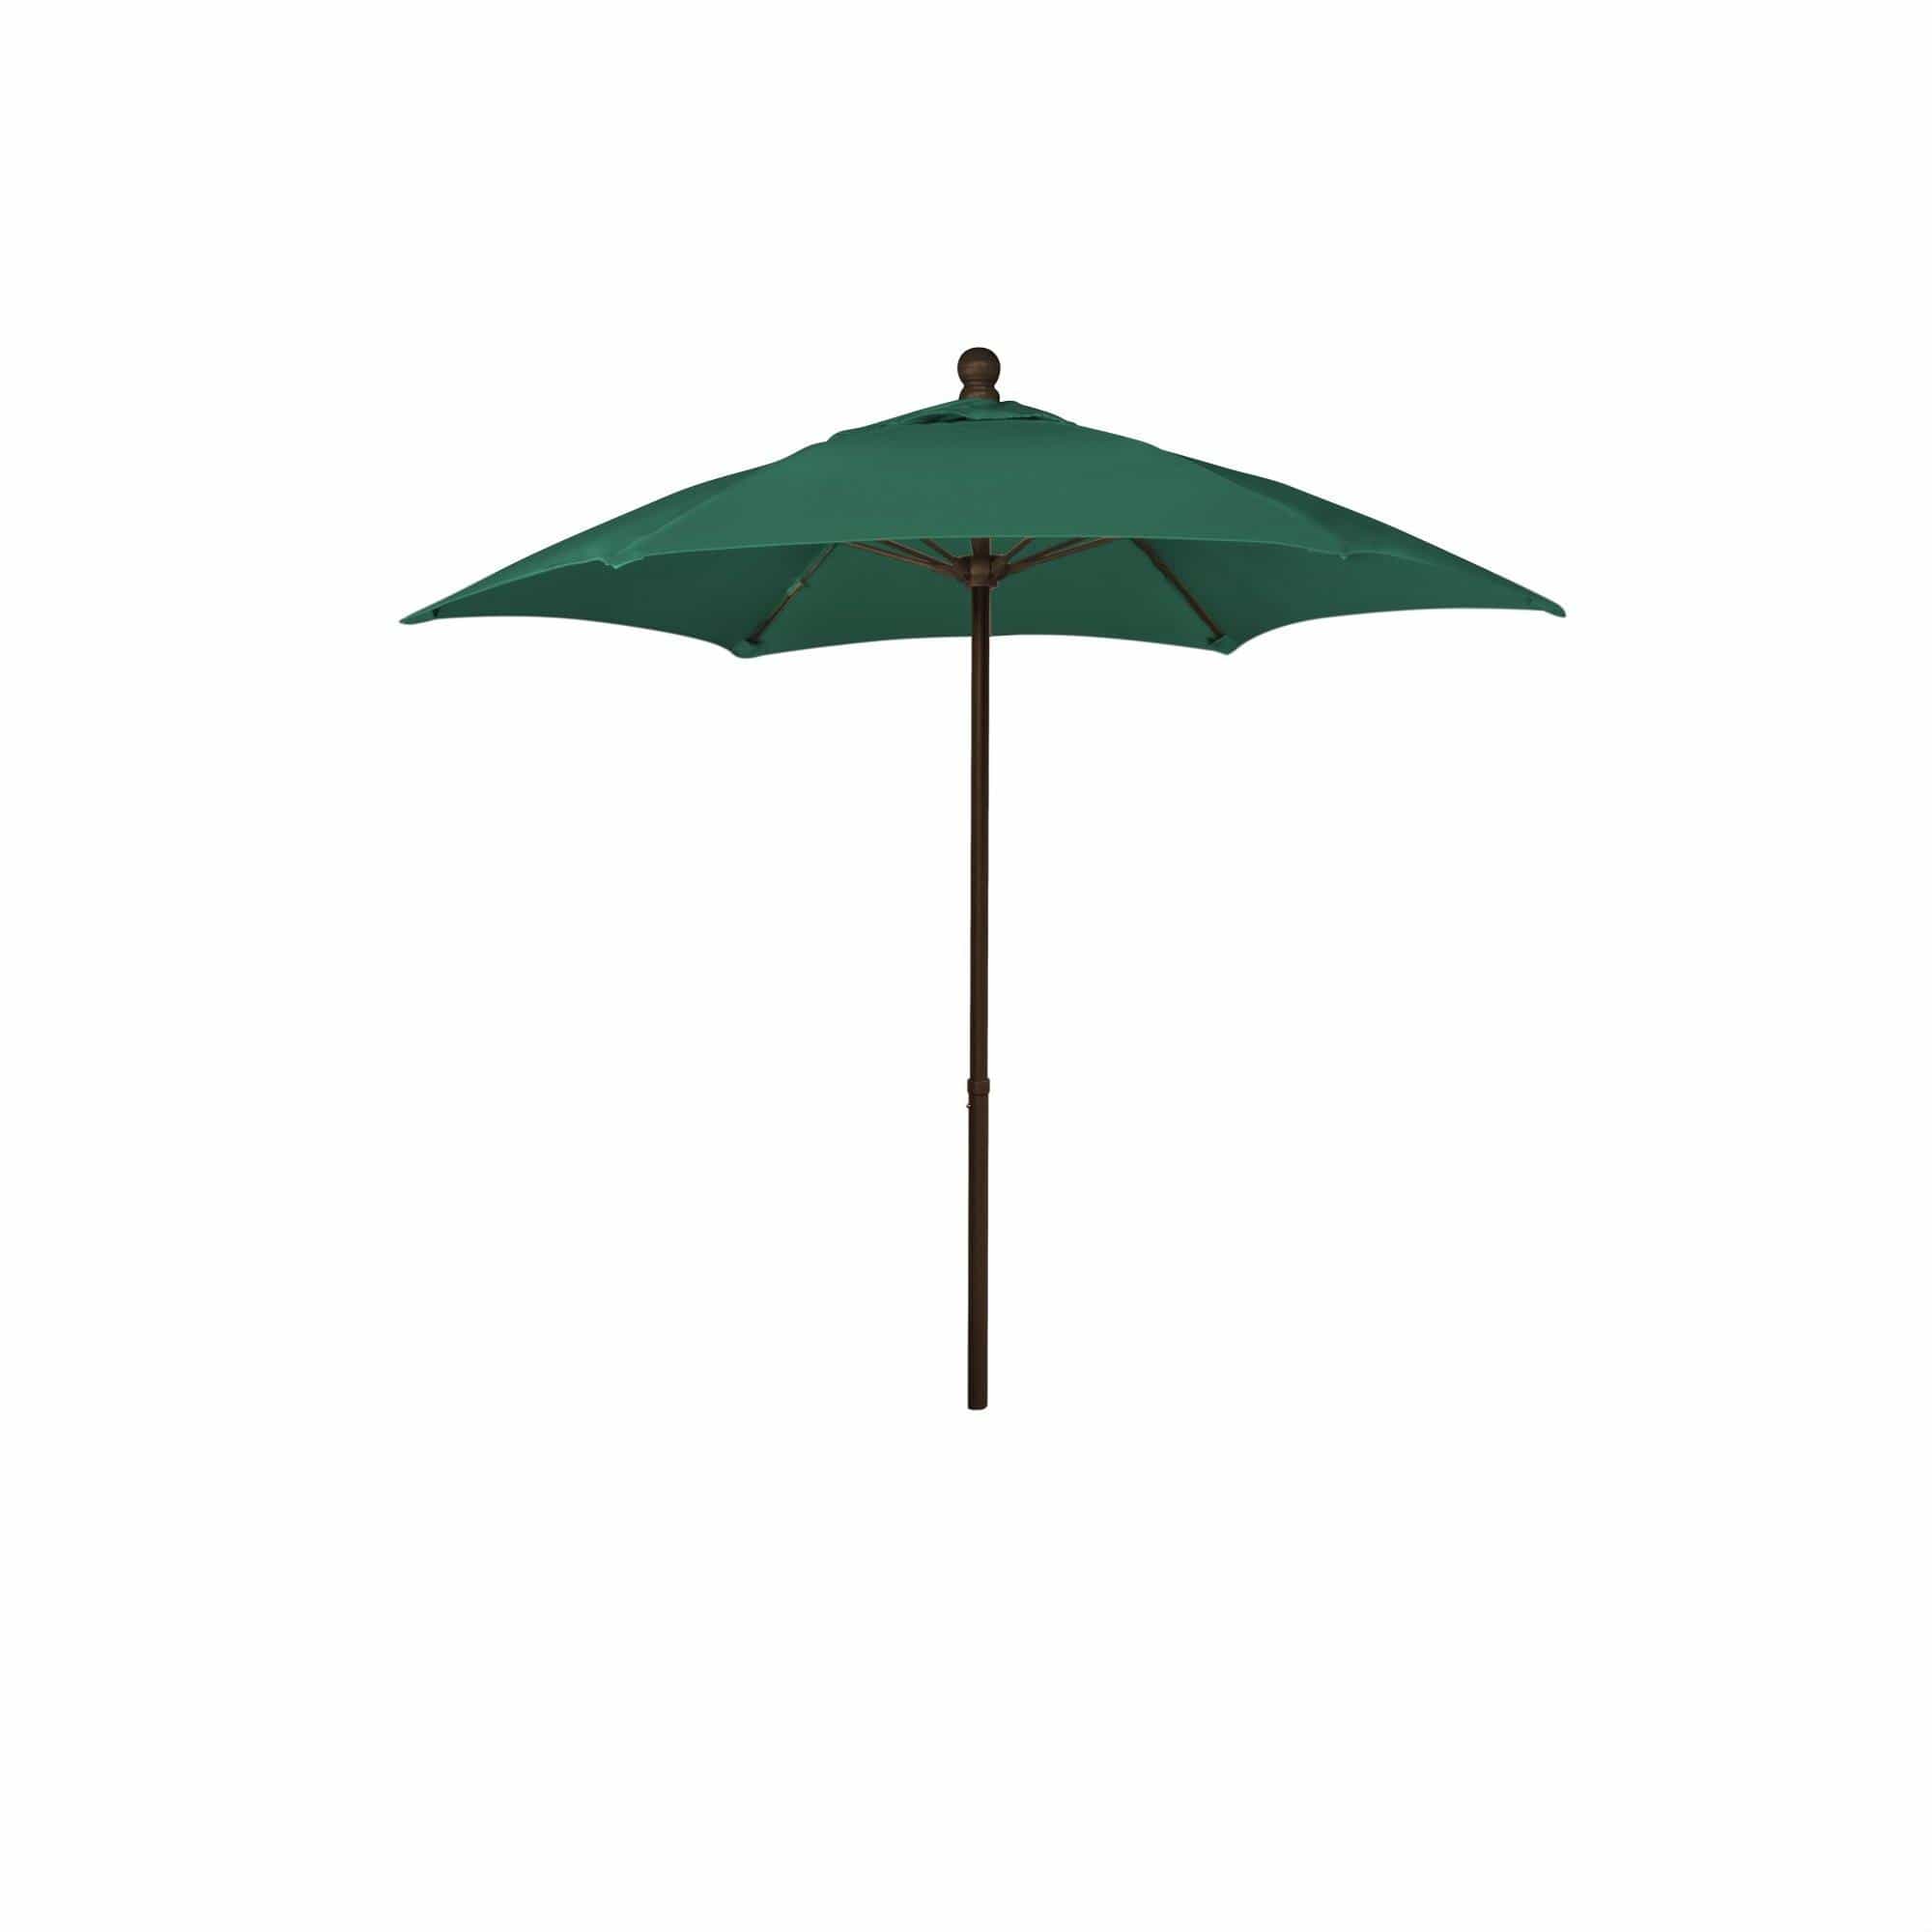 Fiberbuilt Table Umbrellas Forest Green 7.5' Hex Terrace Umbrella 6 Rib Push Up Champagne Bronze  Solution Dyed Acrylic Canopy